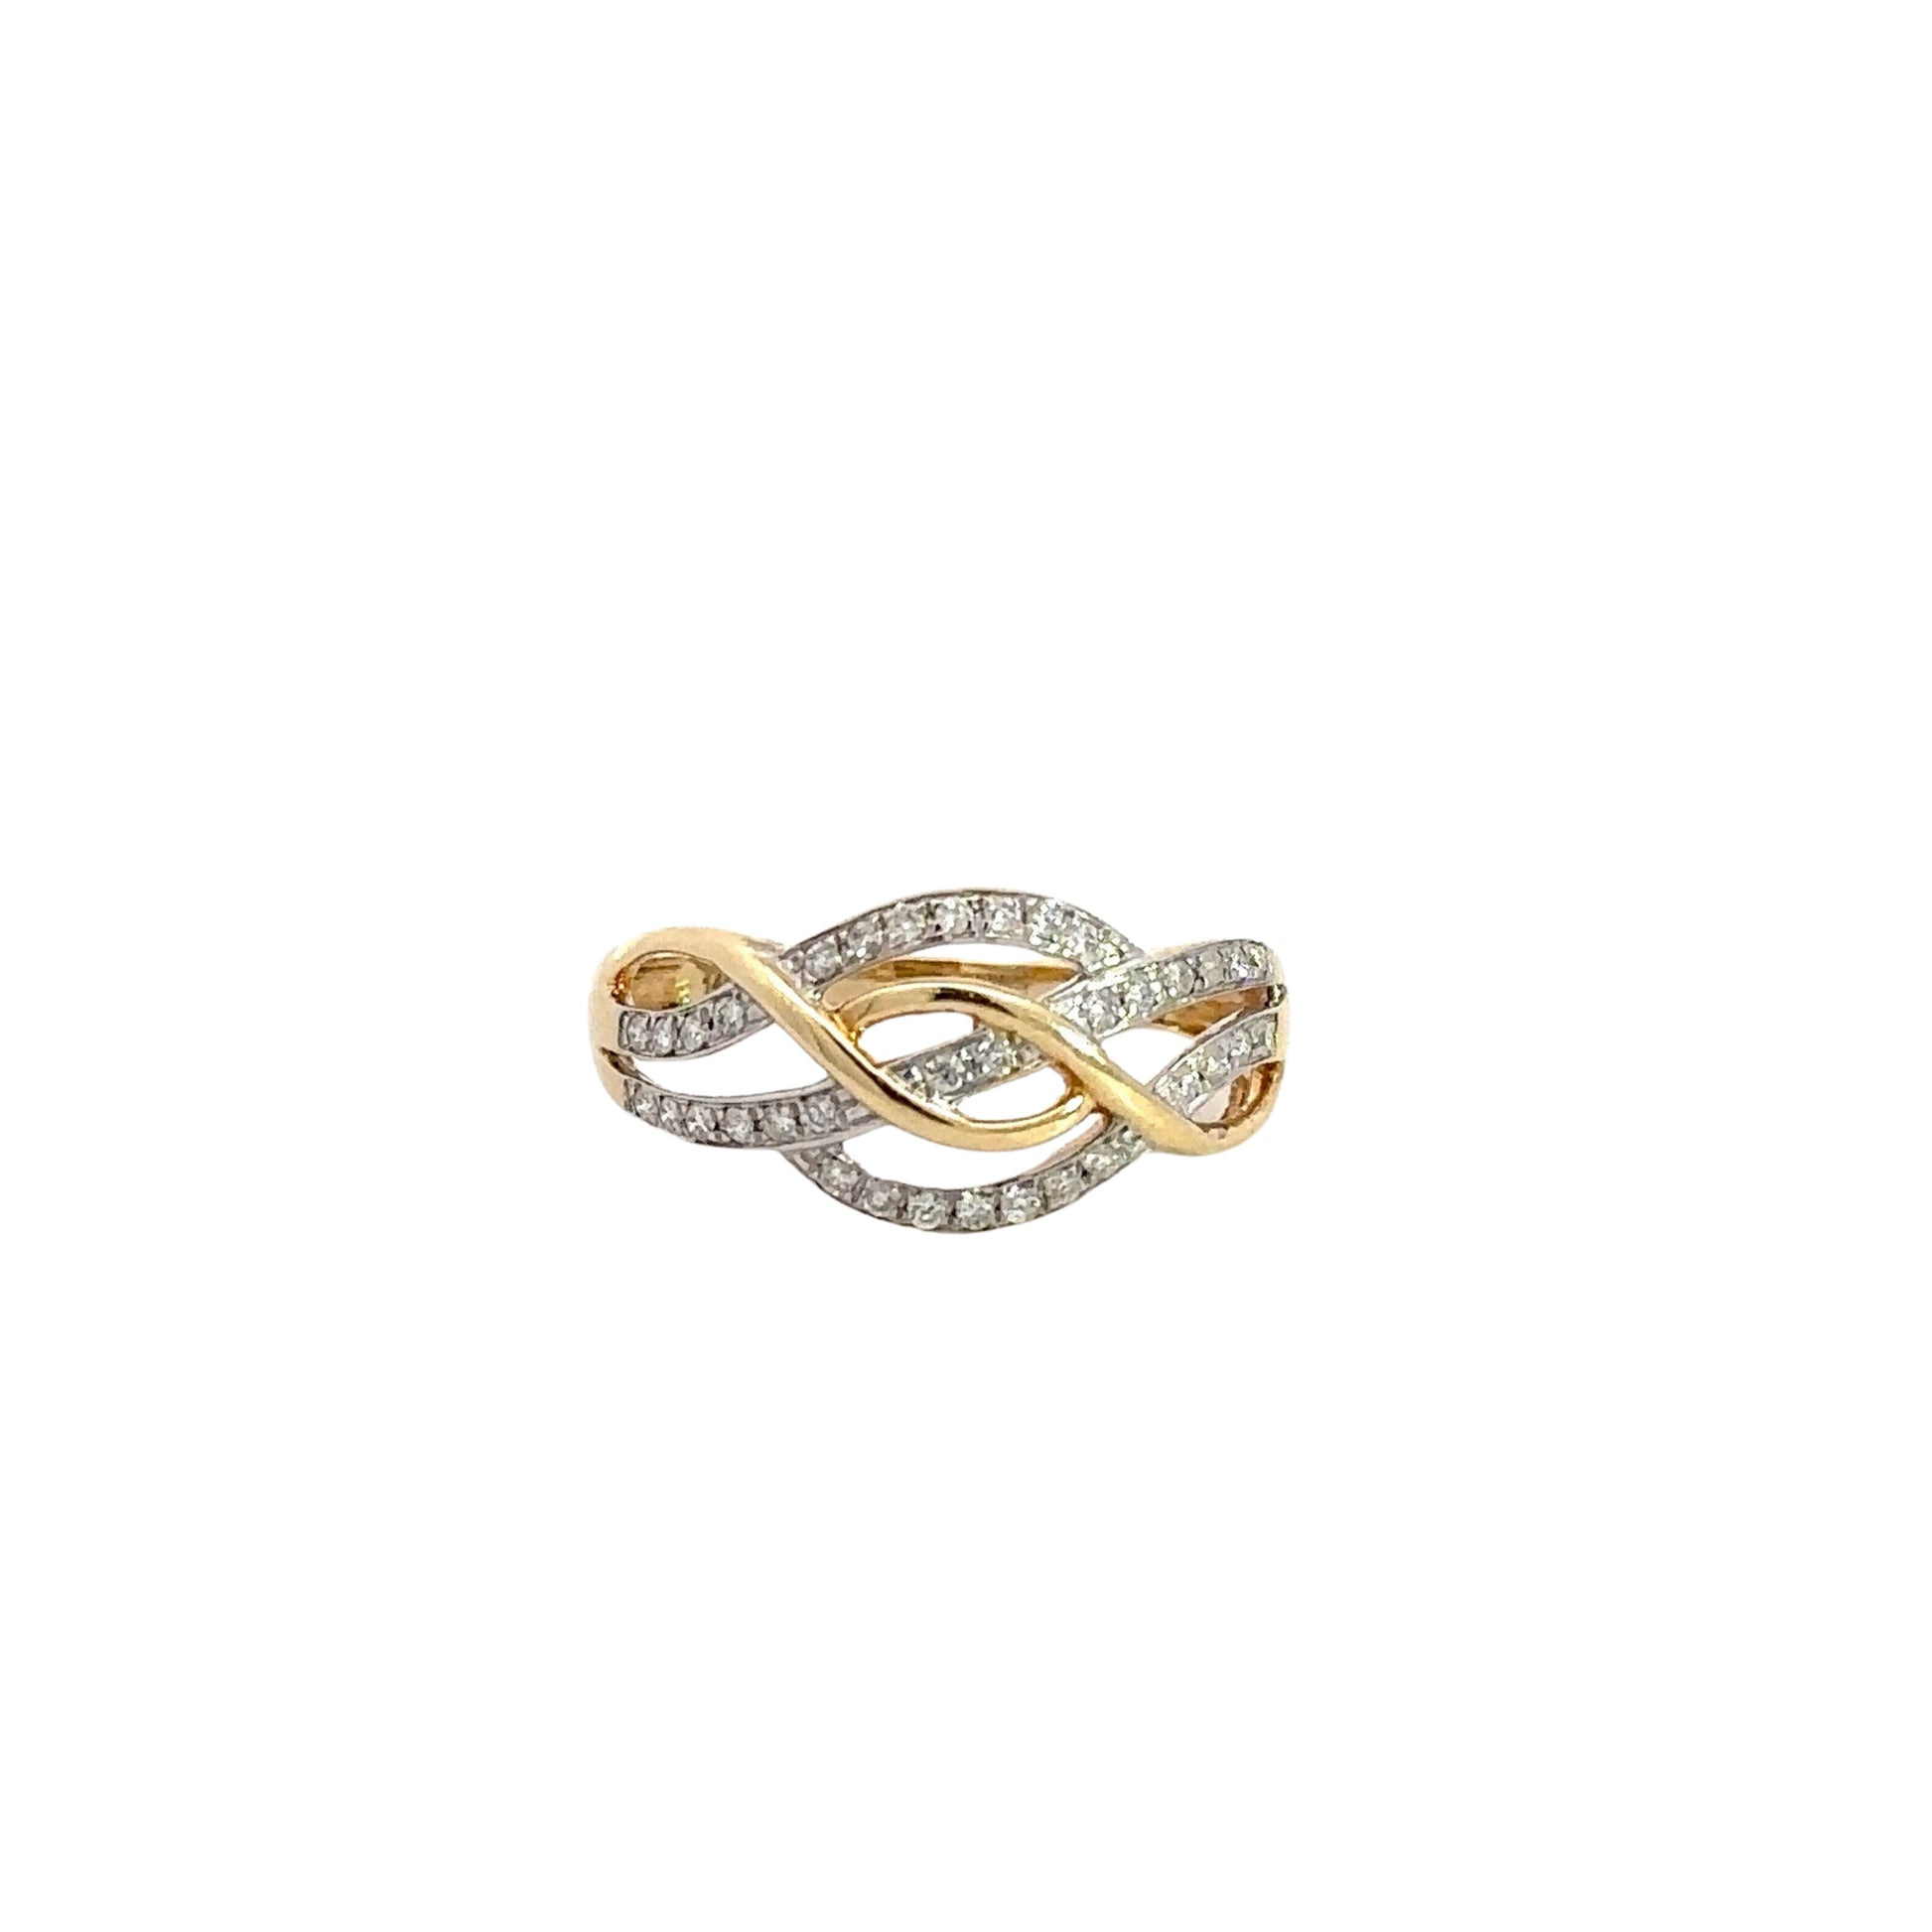 Front of yellow gold crossover ring with round diamonds on part of the crossover design.